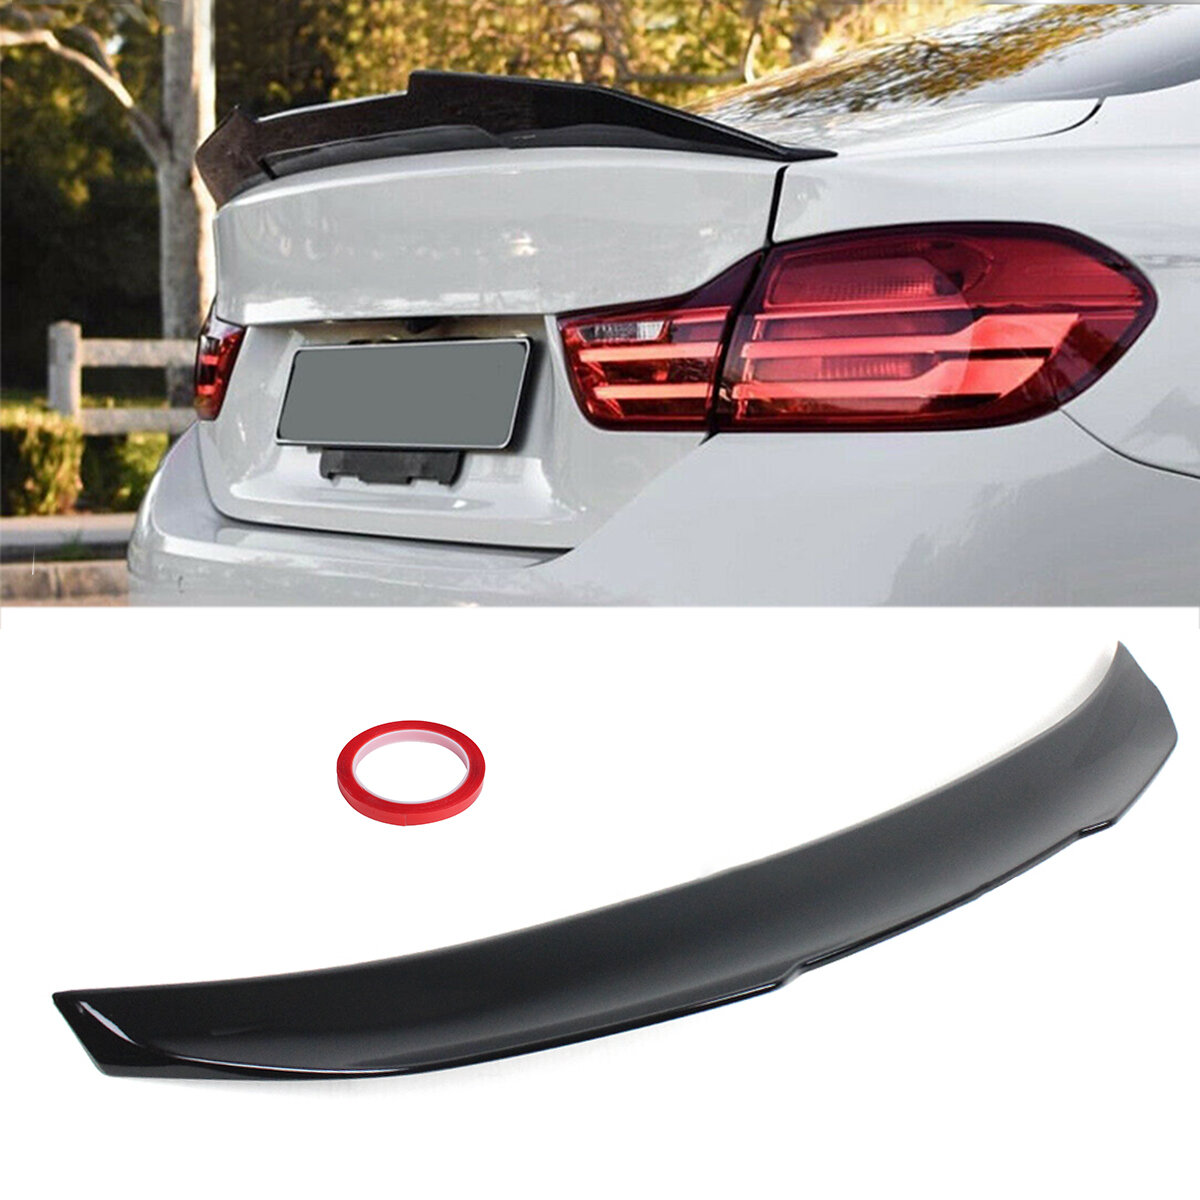 

PSM Style Highkick Rear Trunk Spoiler Boot Lip Wing For BMW F30 F80 M3 2012-2018